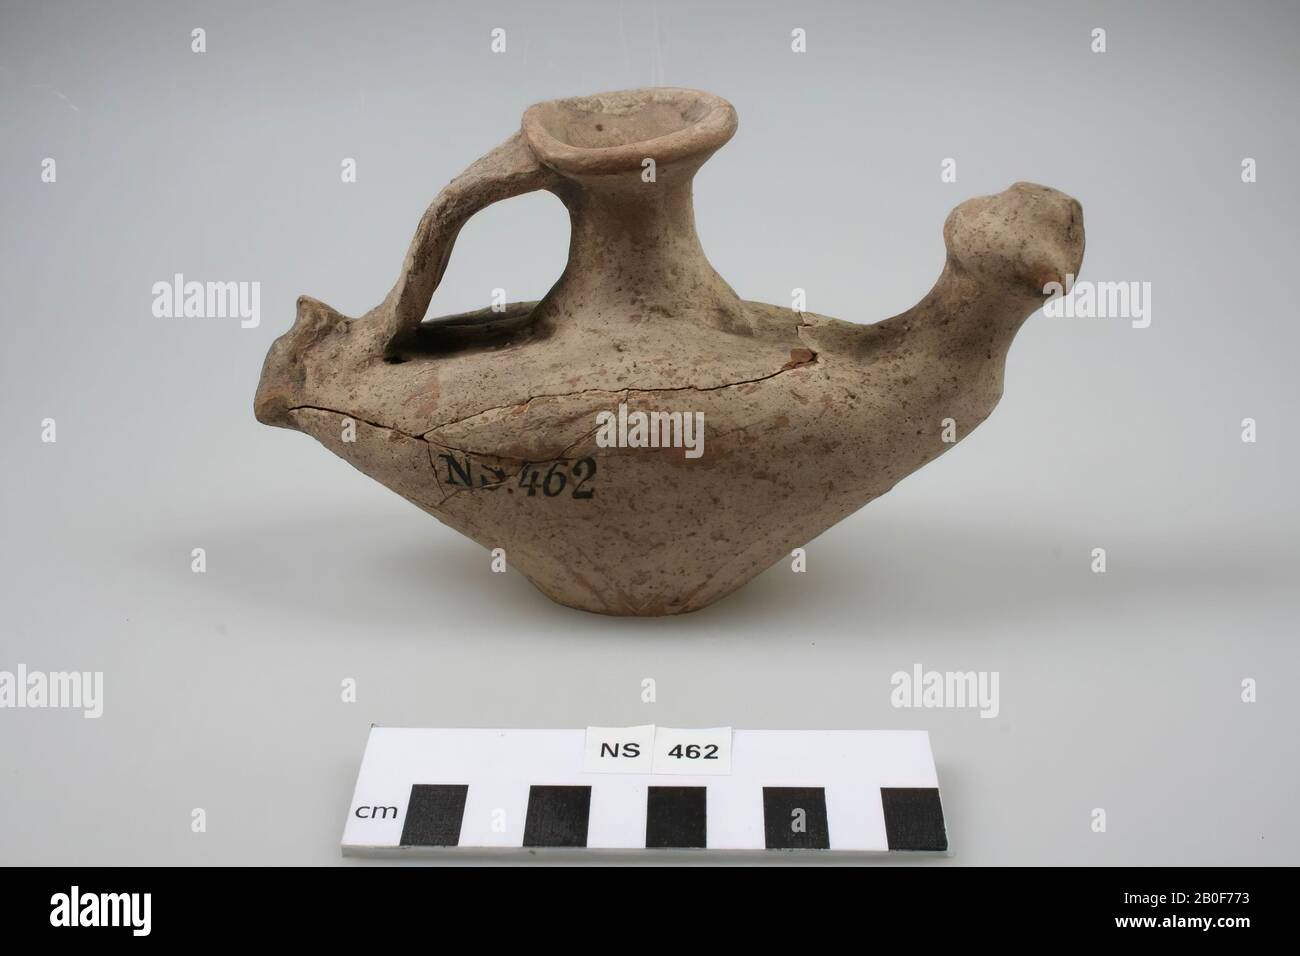 Pottery oil lamp, vase-shaped, with ear, spout with a spherical end and hole, flared neck with opening. Old glueing, oil lamp, earthenware, 17 x 6.3 x 10.9 cm, roman, Netherlands, Gelderland, Nijmegen, Nijmegen Stock Photo